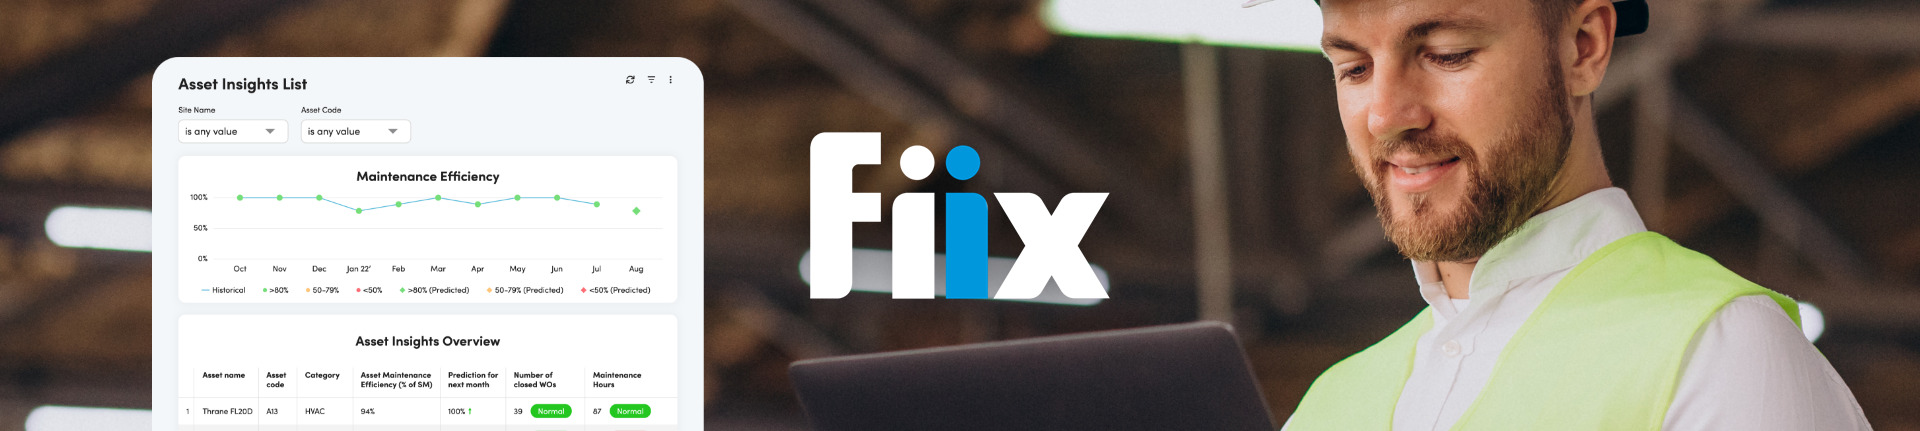 Free 30-Day Fiix by Rockwell Automation Trial